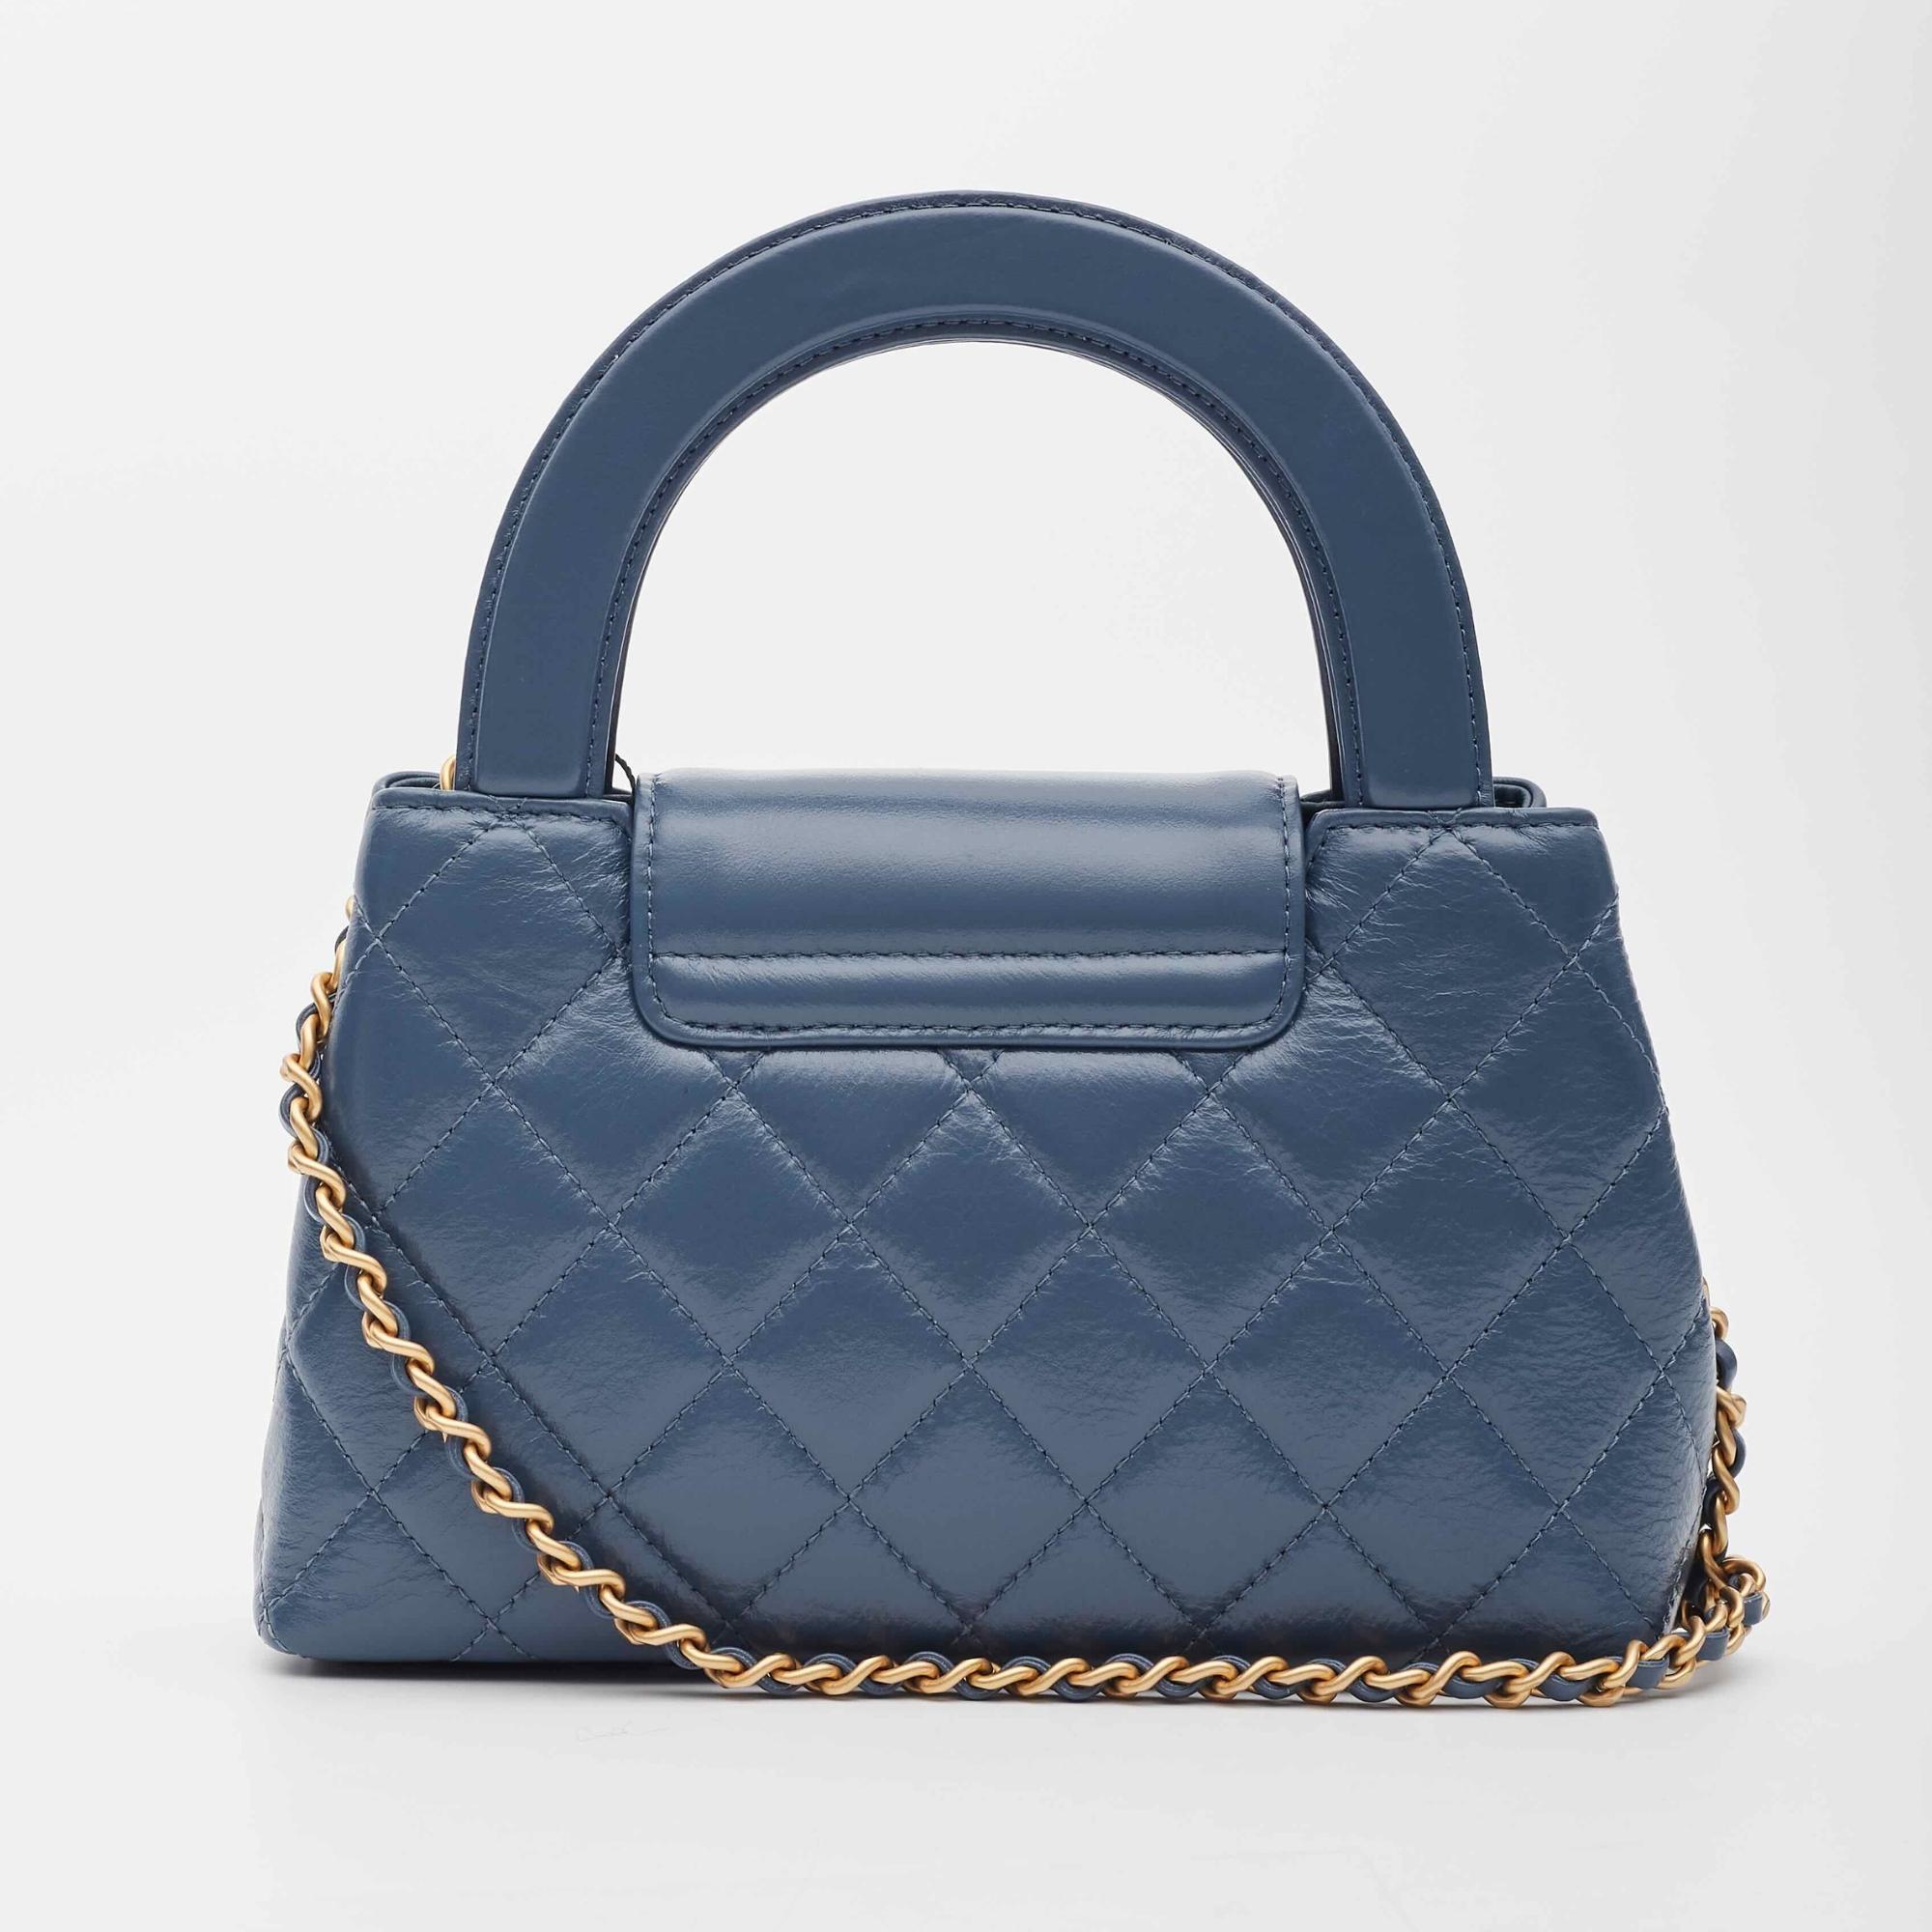 Chanel Top Handle Bag. From the Fall/Winter 2023 Collection by Virginie Viard. This mini bag is a twist on an archival Chanel bag, featuring a long crossbody chain strap. This dual top handle bag is quilted in shiny aged calfskin leather in blue,